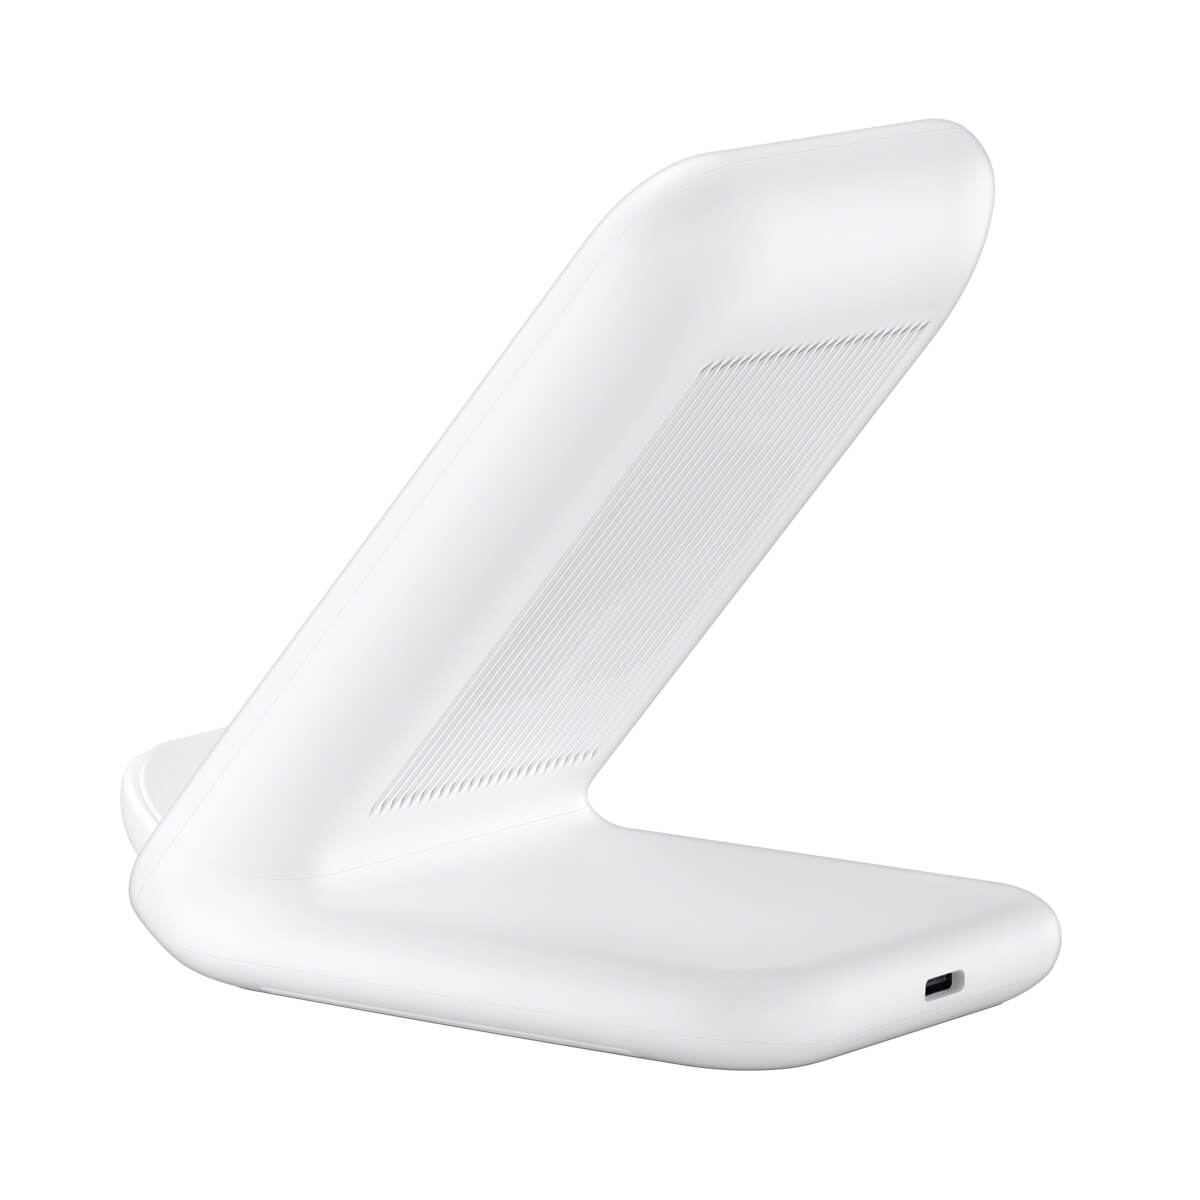 Samsung Wireless Charger Stand (EP-N5200) White